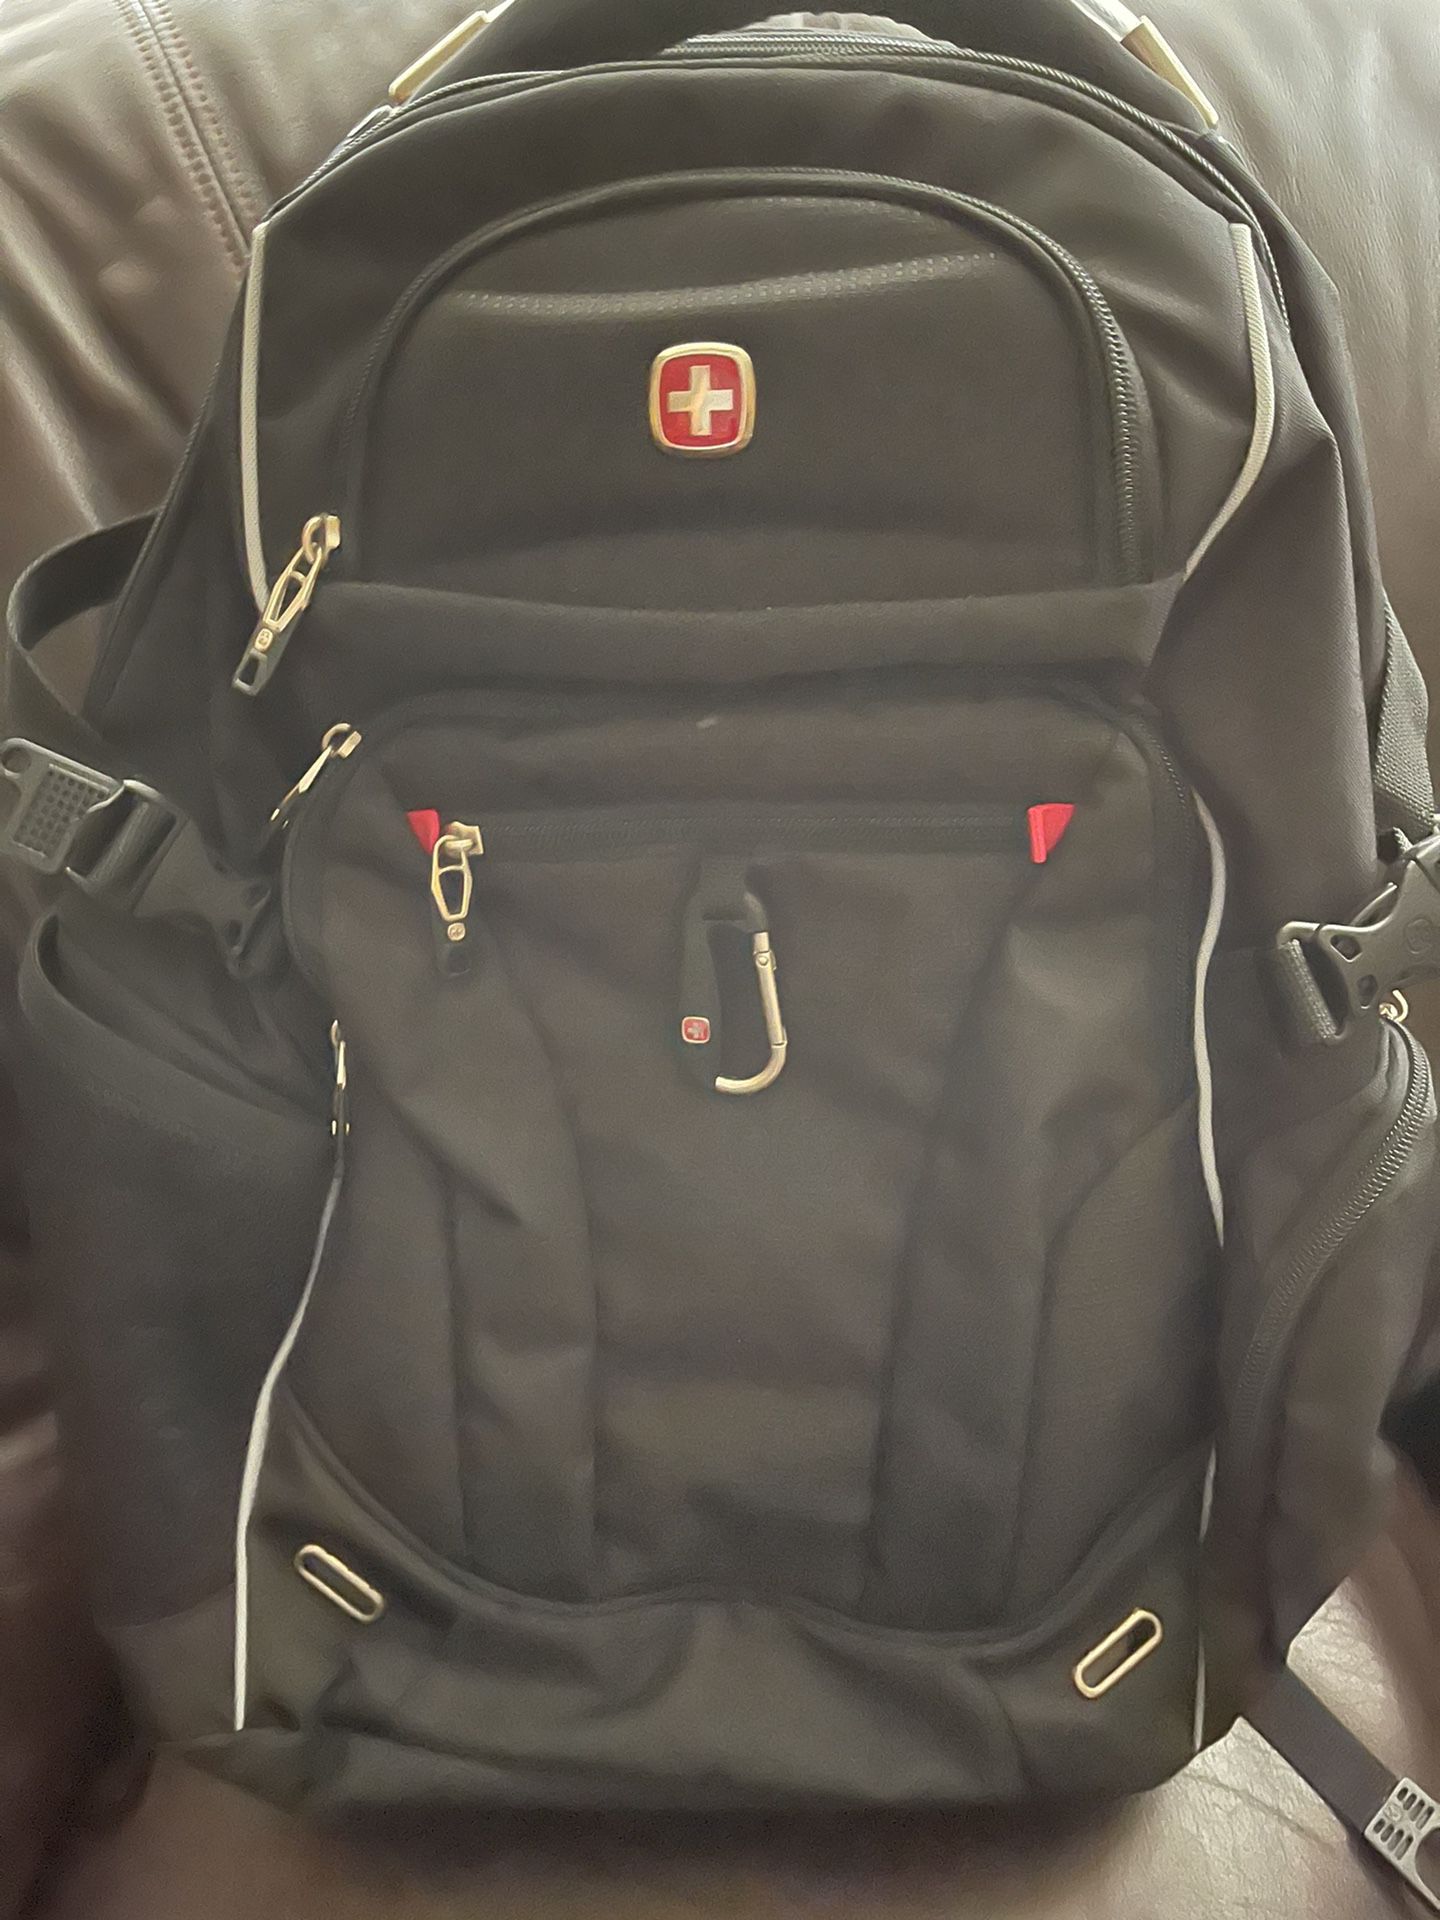 Swiss Army Backpack Never Used